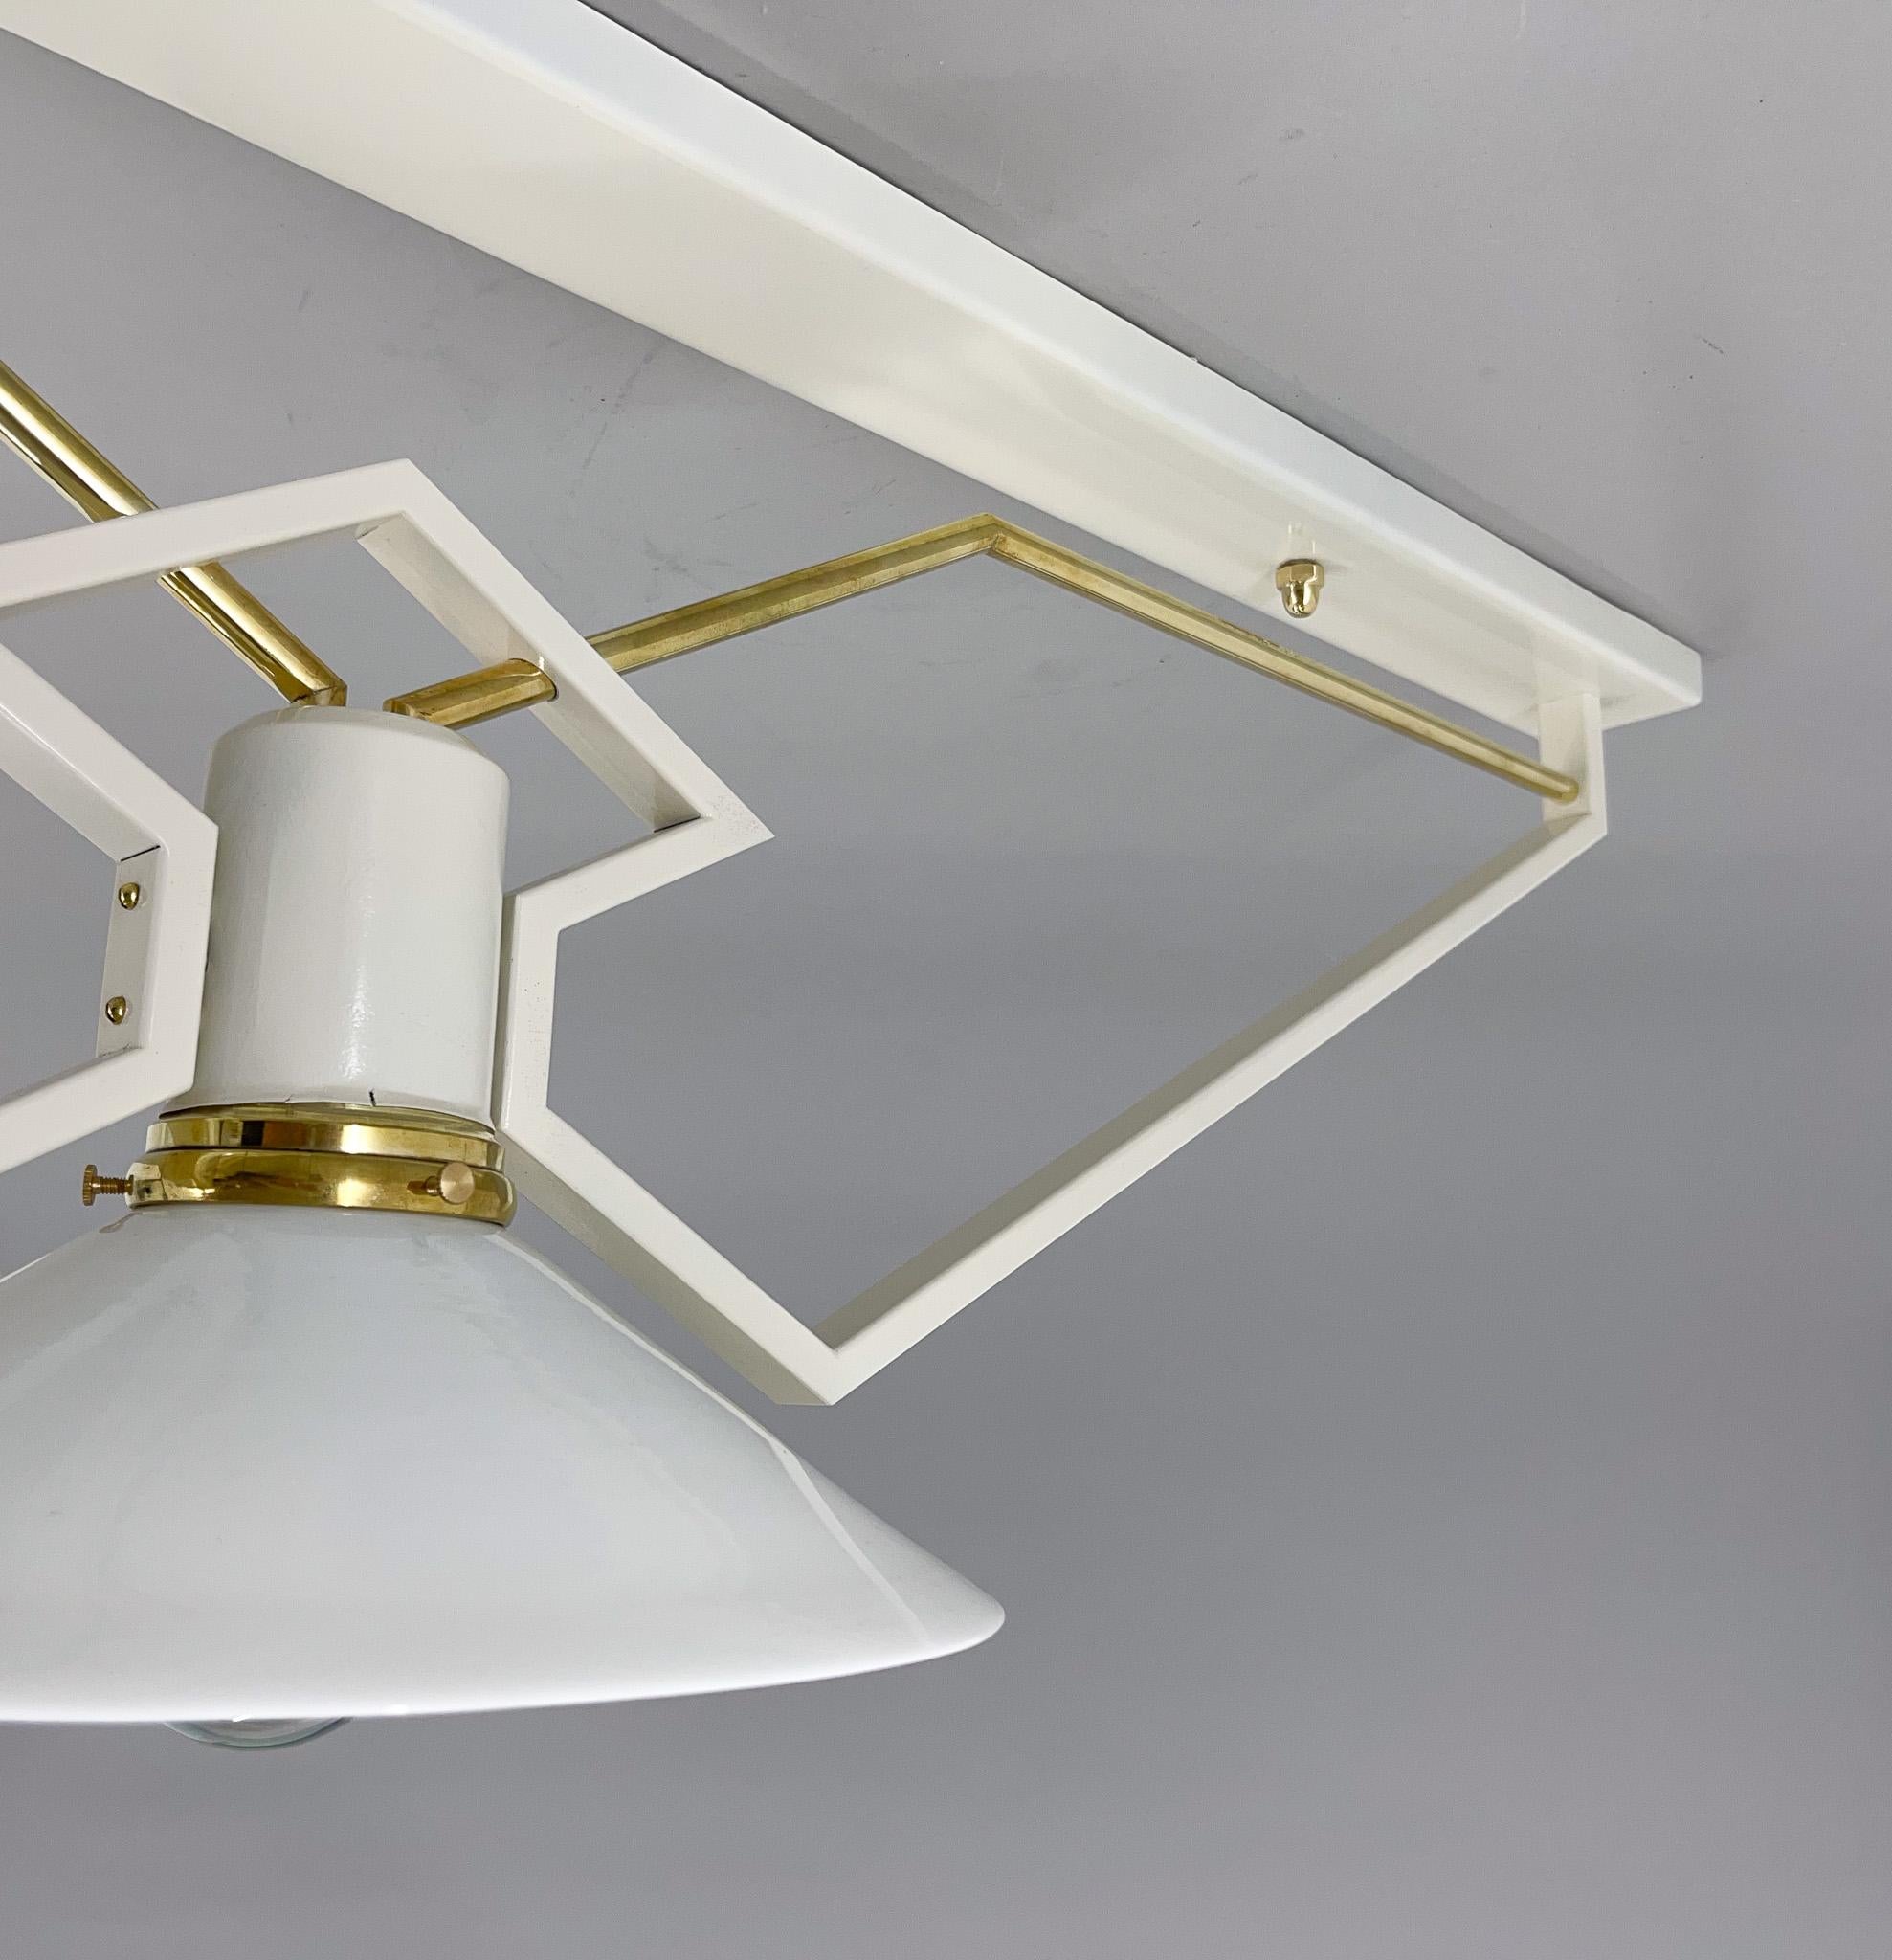 Metal 1950s Unique Ceiling Lights with Brass Details, Restored, 4 pieces available For Sale